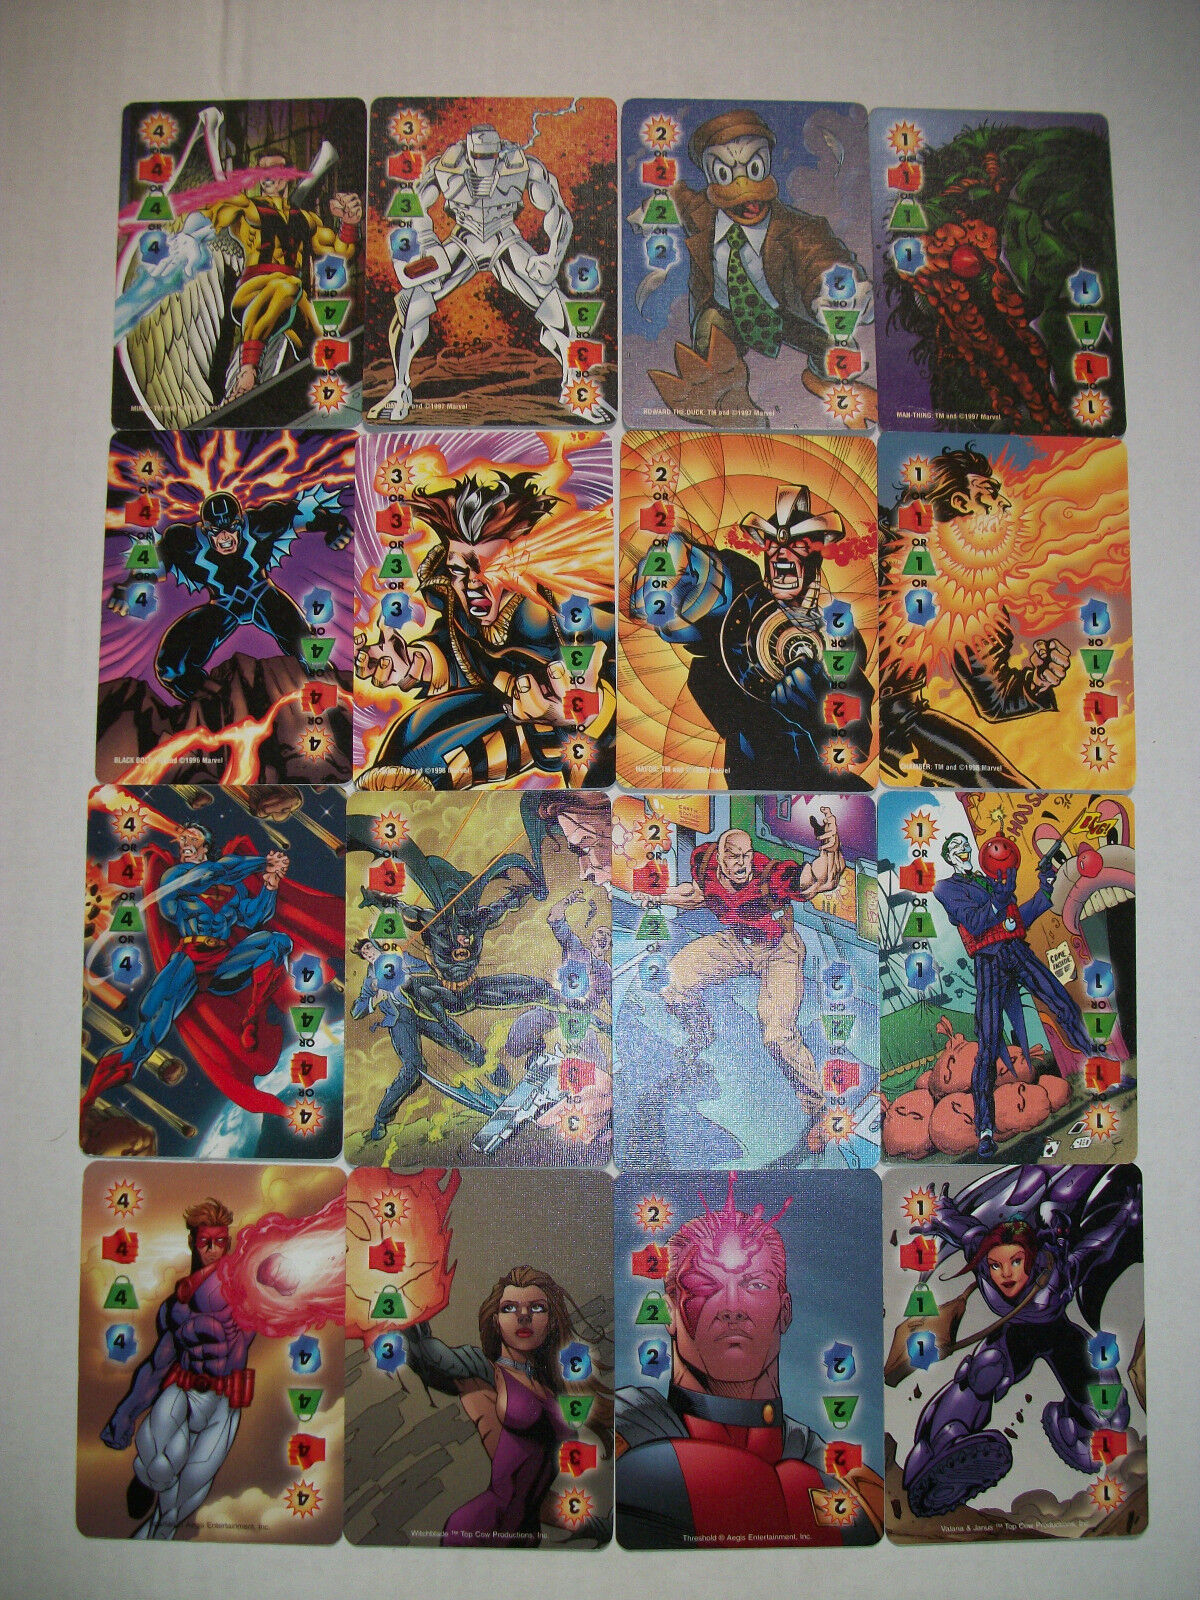 SET OF ALL 16 MARVEL, DC, IMAGE OVERPOWER MULTI-POWER POWER CARDS 1-4 INTELLECT